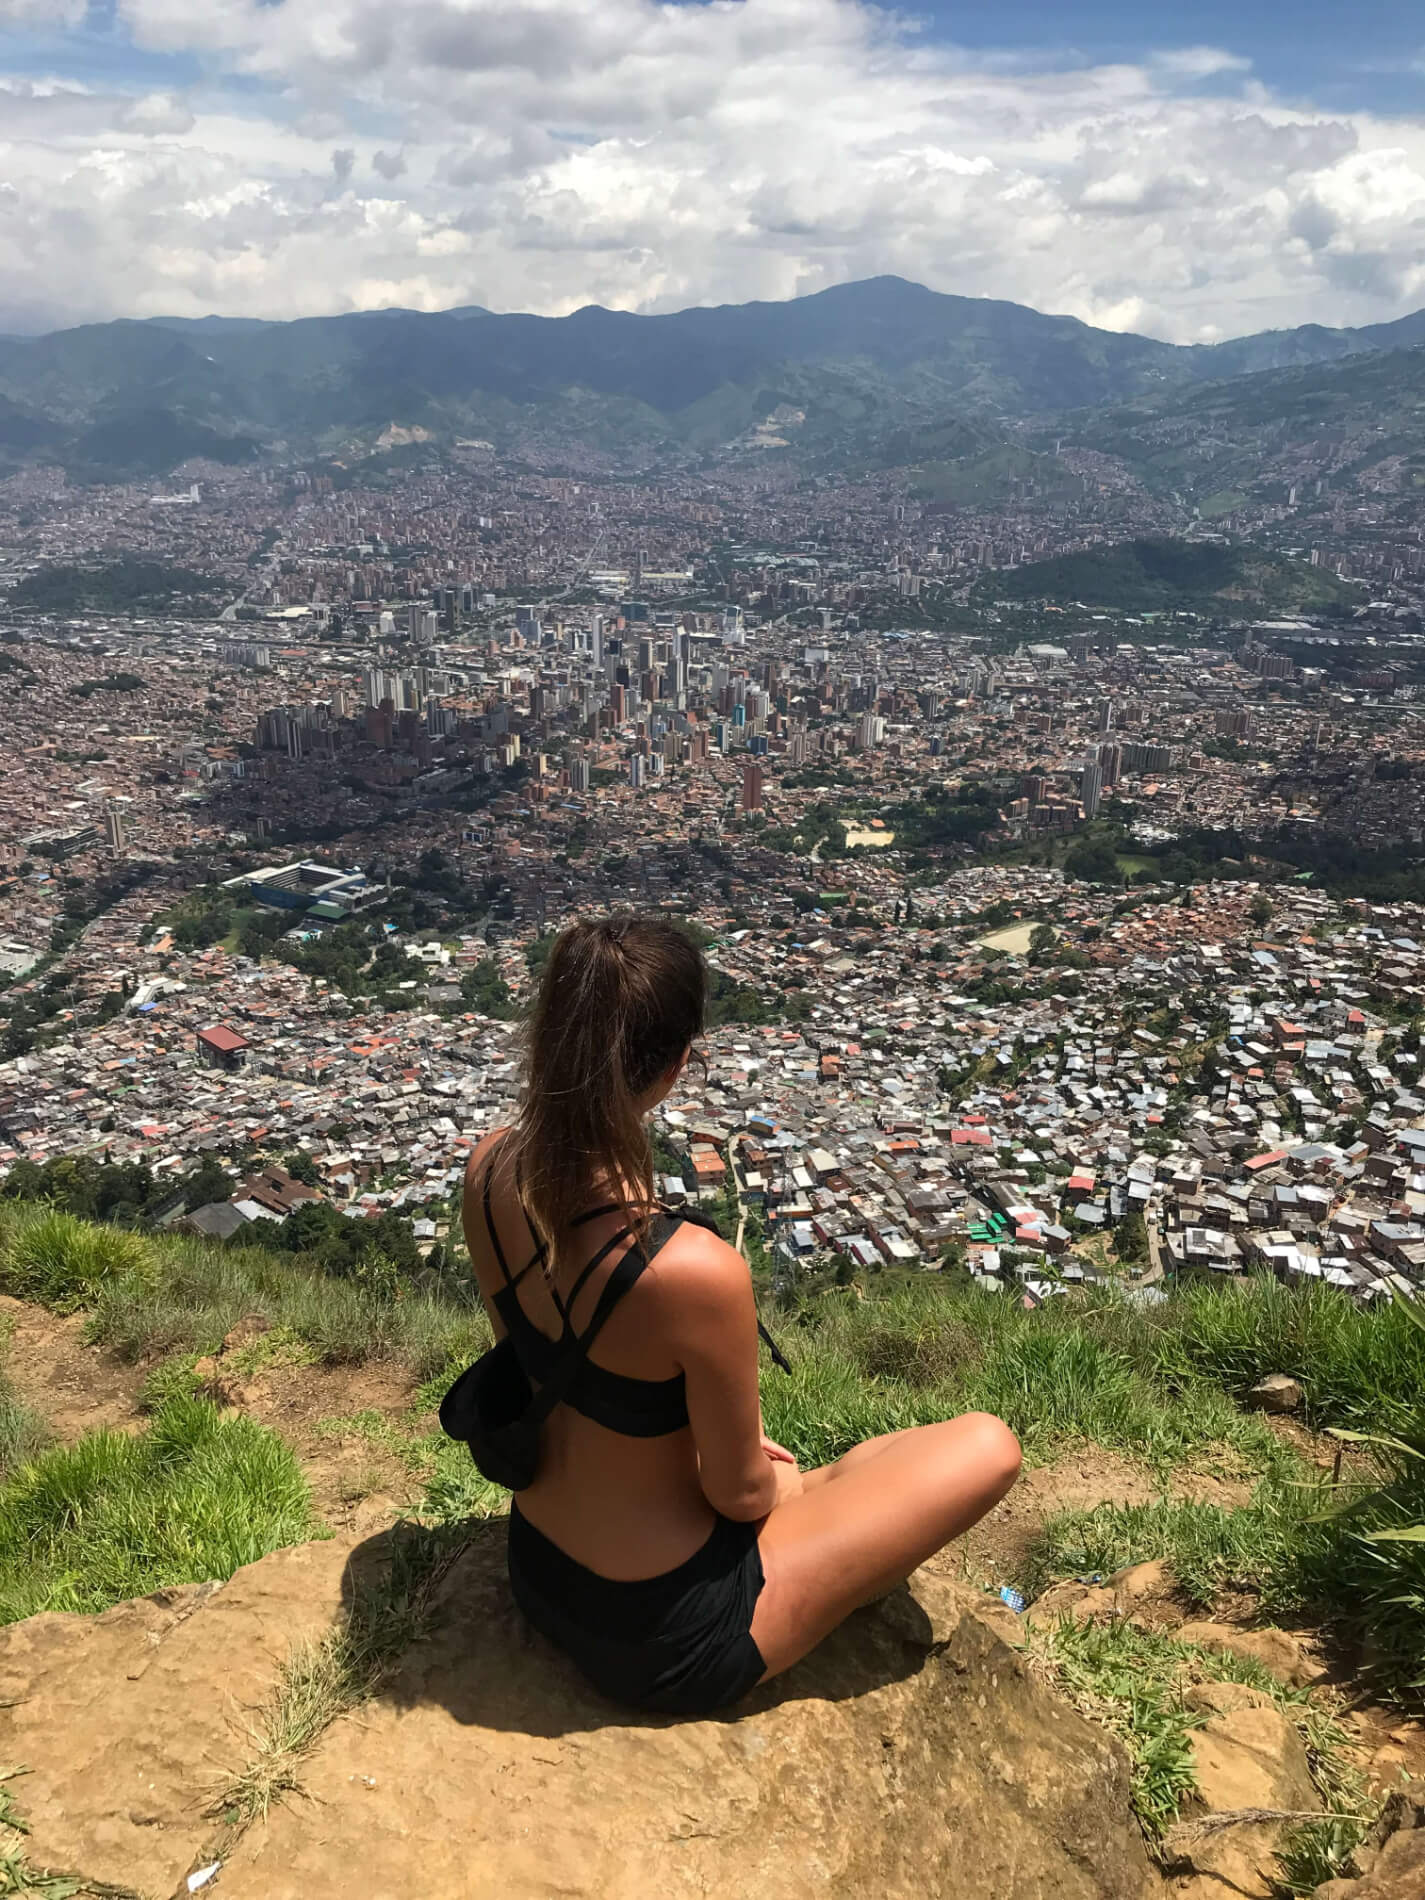 Helene Doetsch image from behind as she sits atop a hill overlooking a city